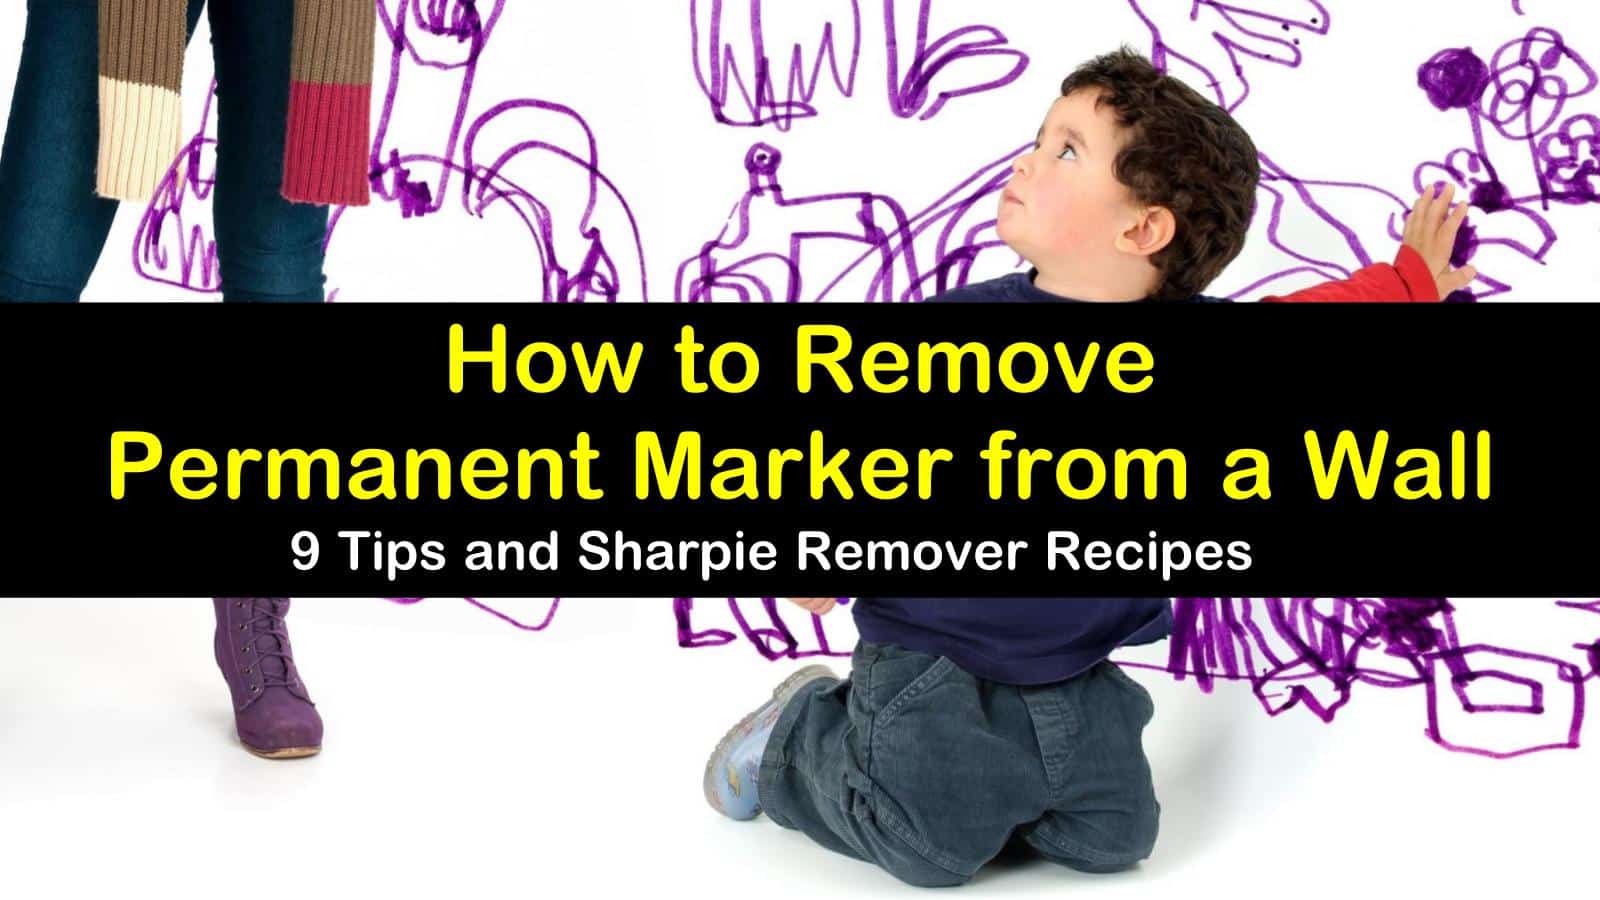 how to remove permanent marker from a wall titleimg1